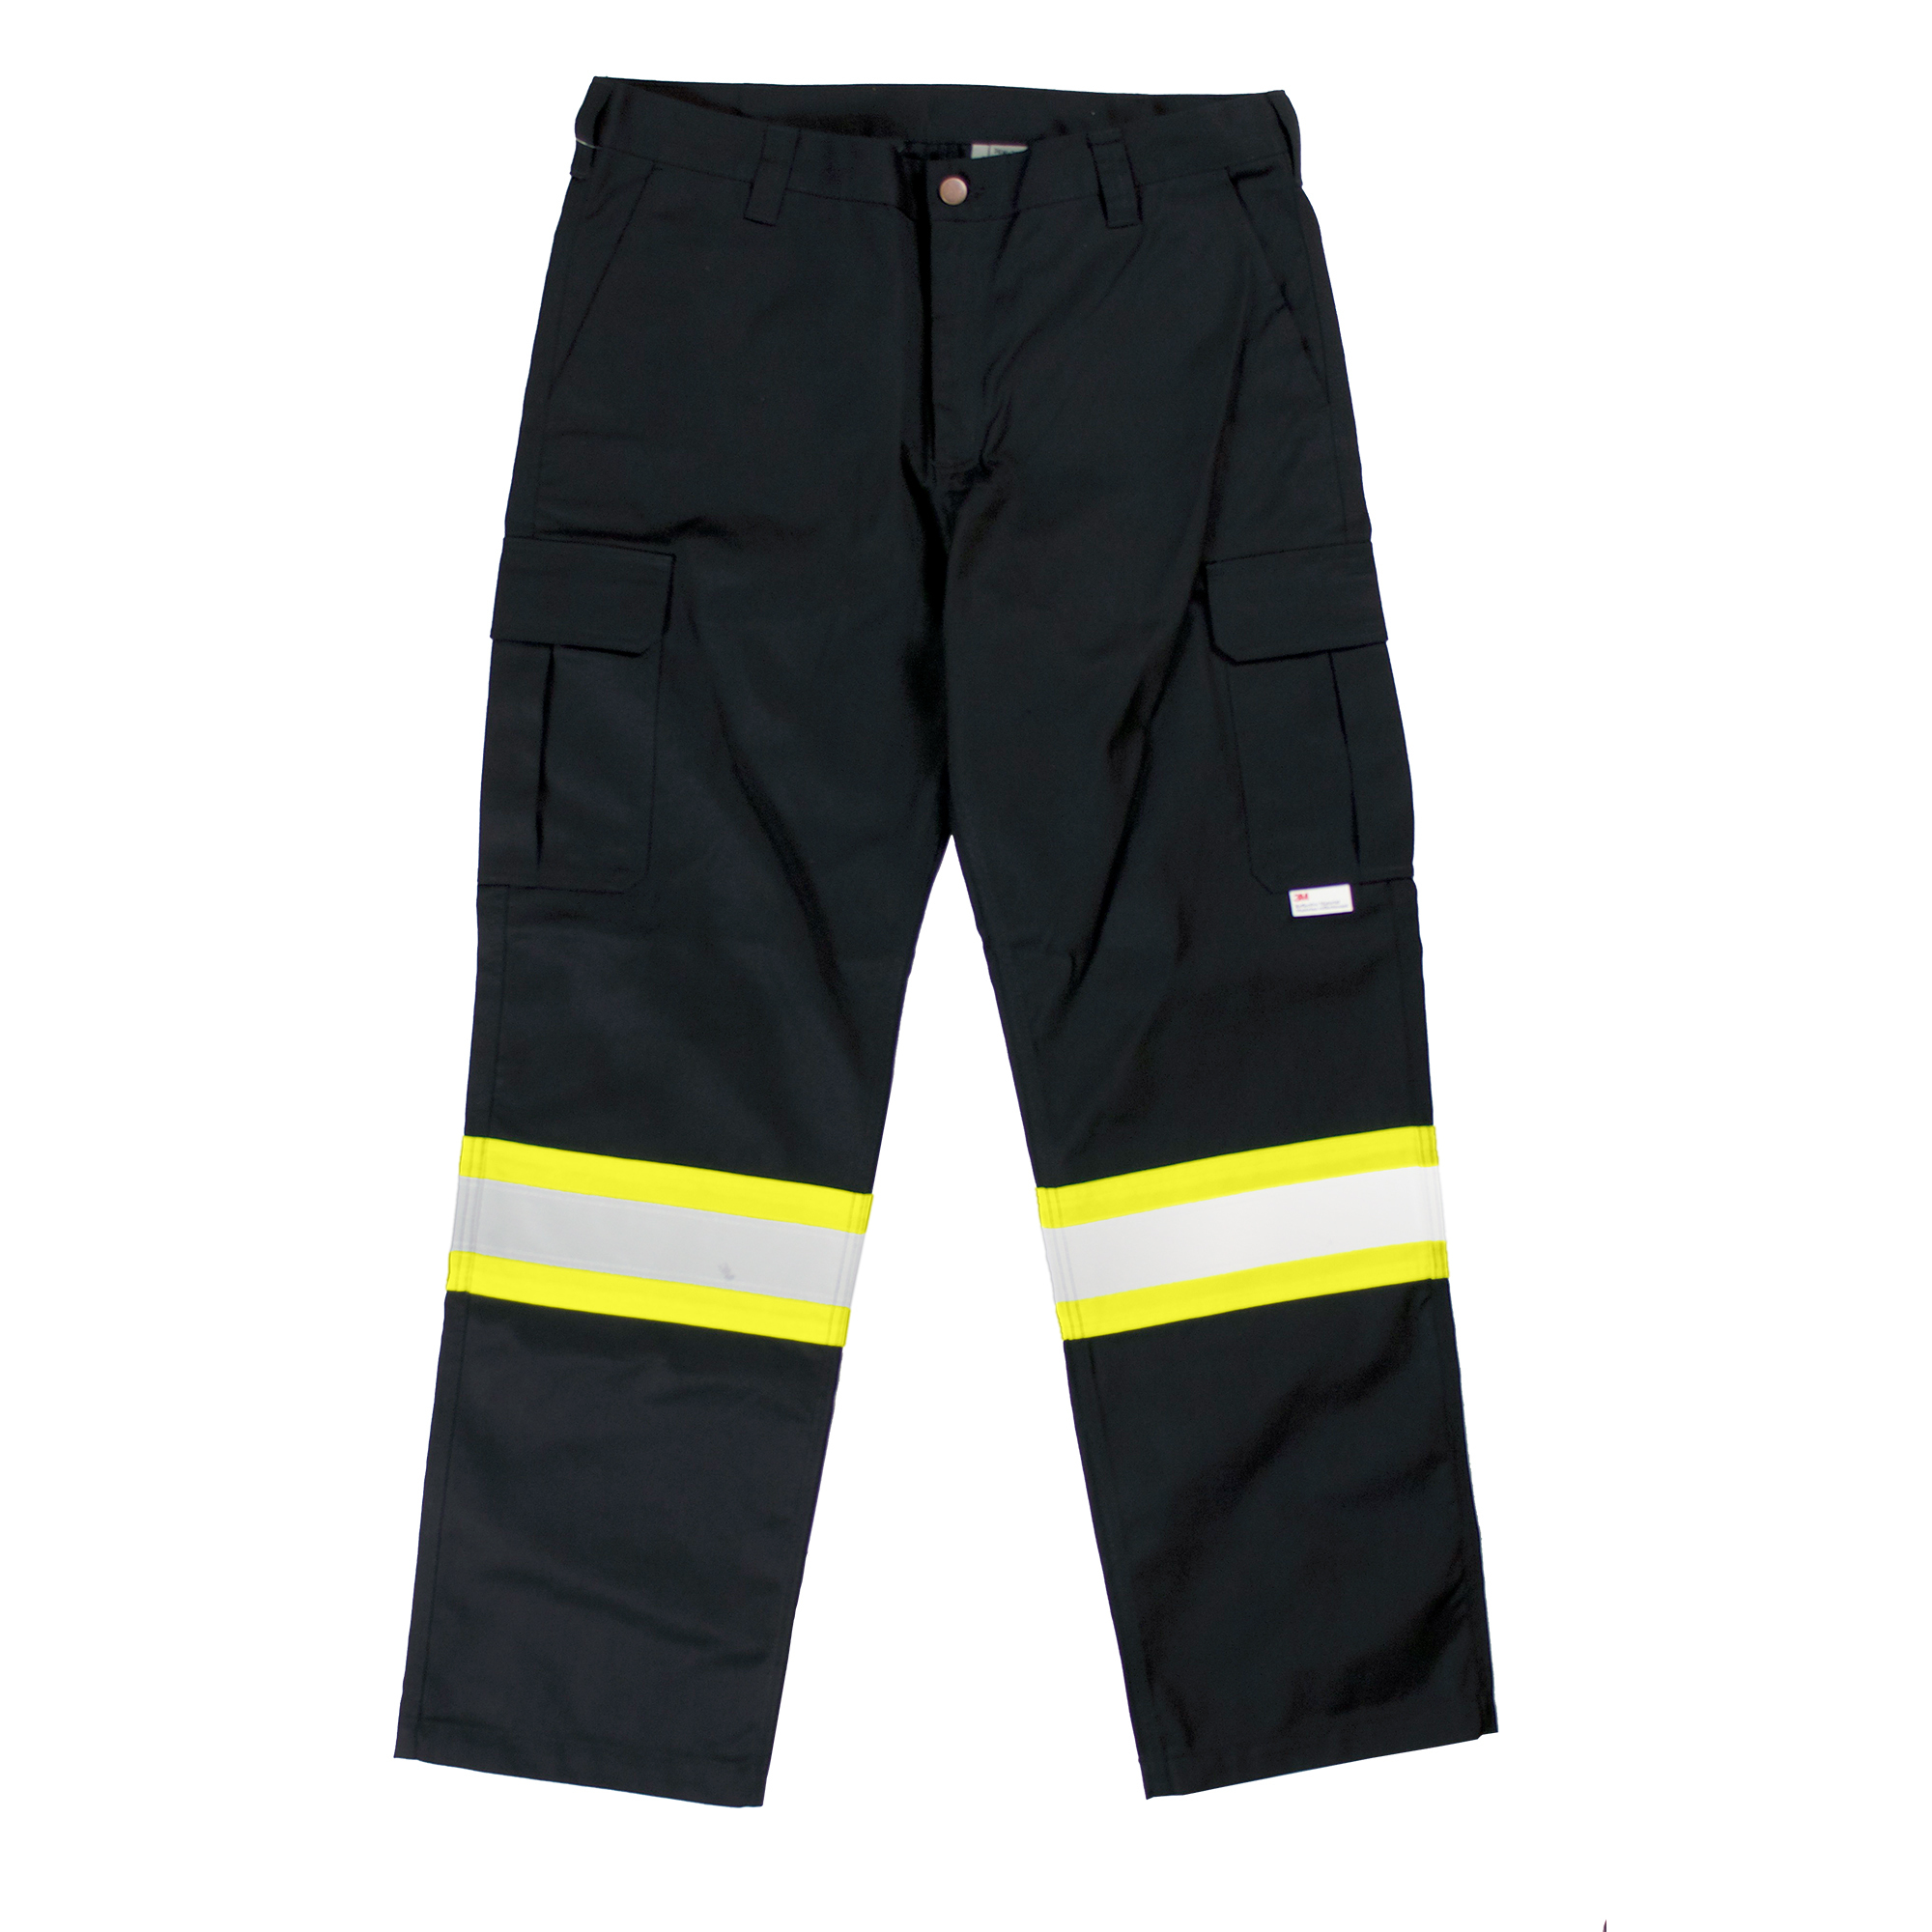 Tough Duck, Safety Cargo Utility Pant, Waist 36 in, Inseam 34 in, Color Black, Model S60741